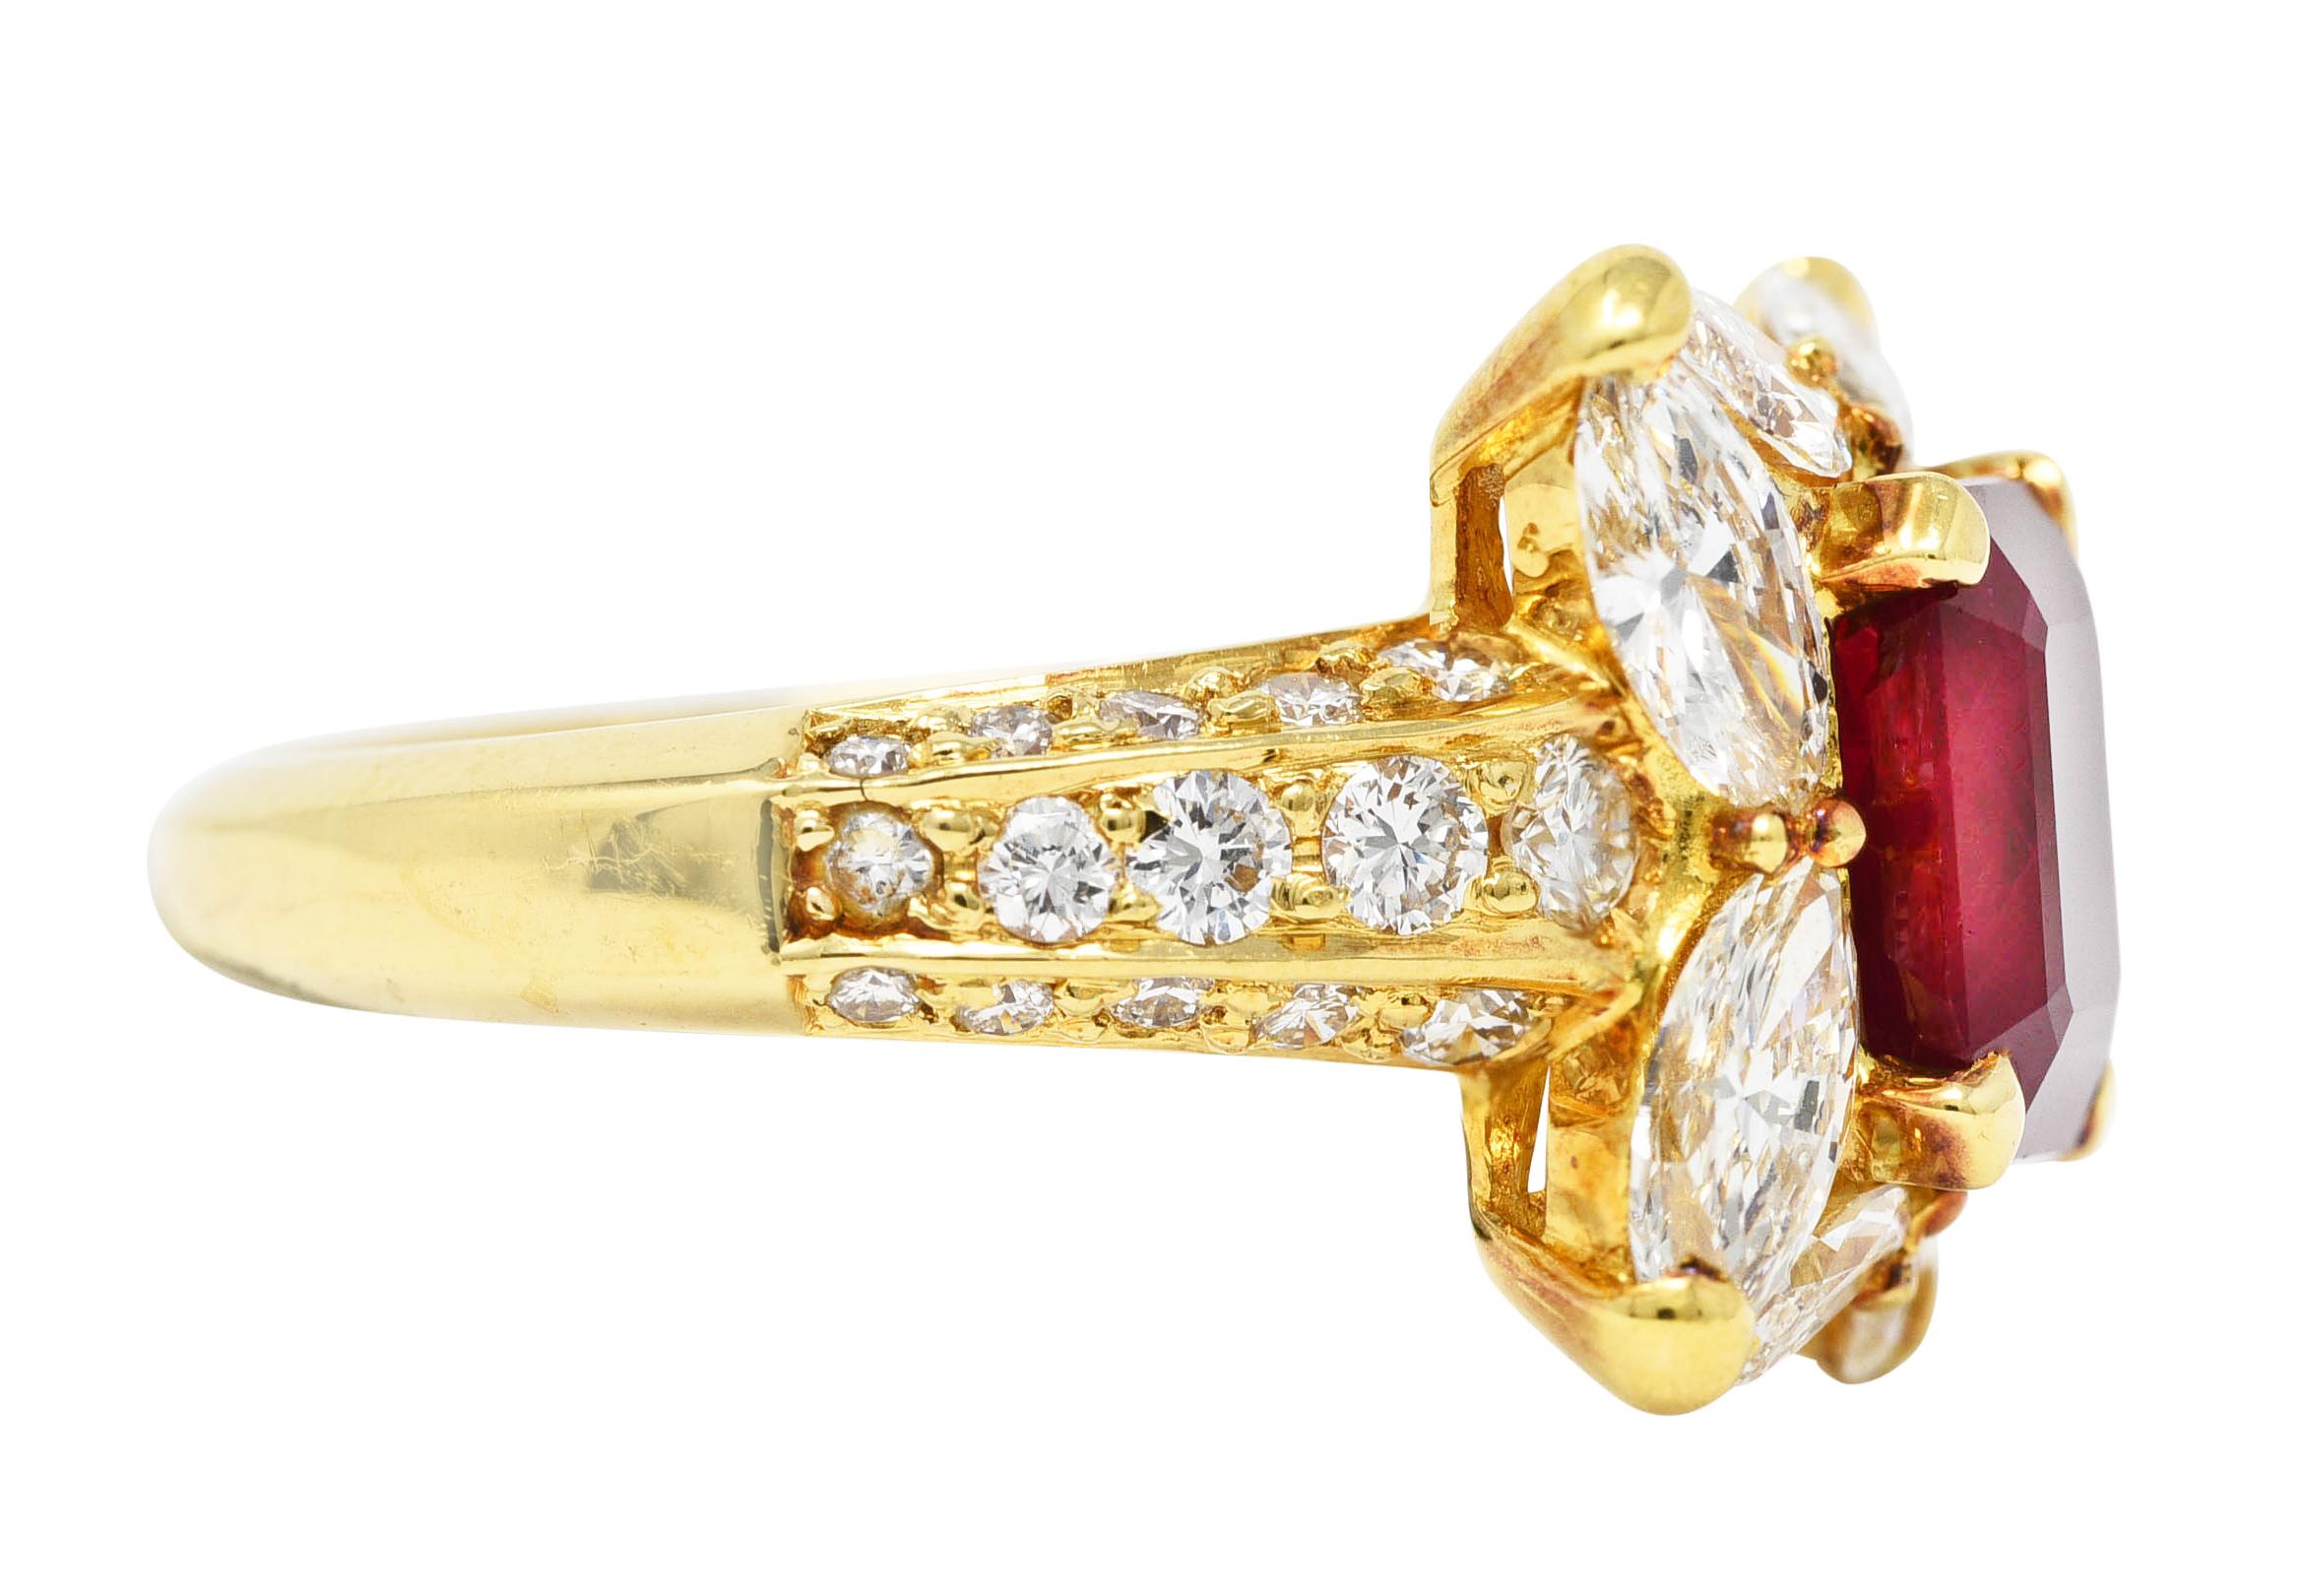 Vintage 3.49 Carats Emerald Cut Ruby Diamond 18 Karat Yellow Gold Cluster Ring In Excellent Condition For Sale In Philadelphia, PA